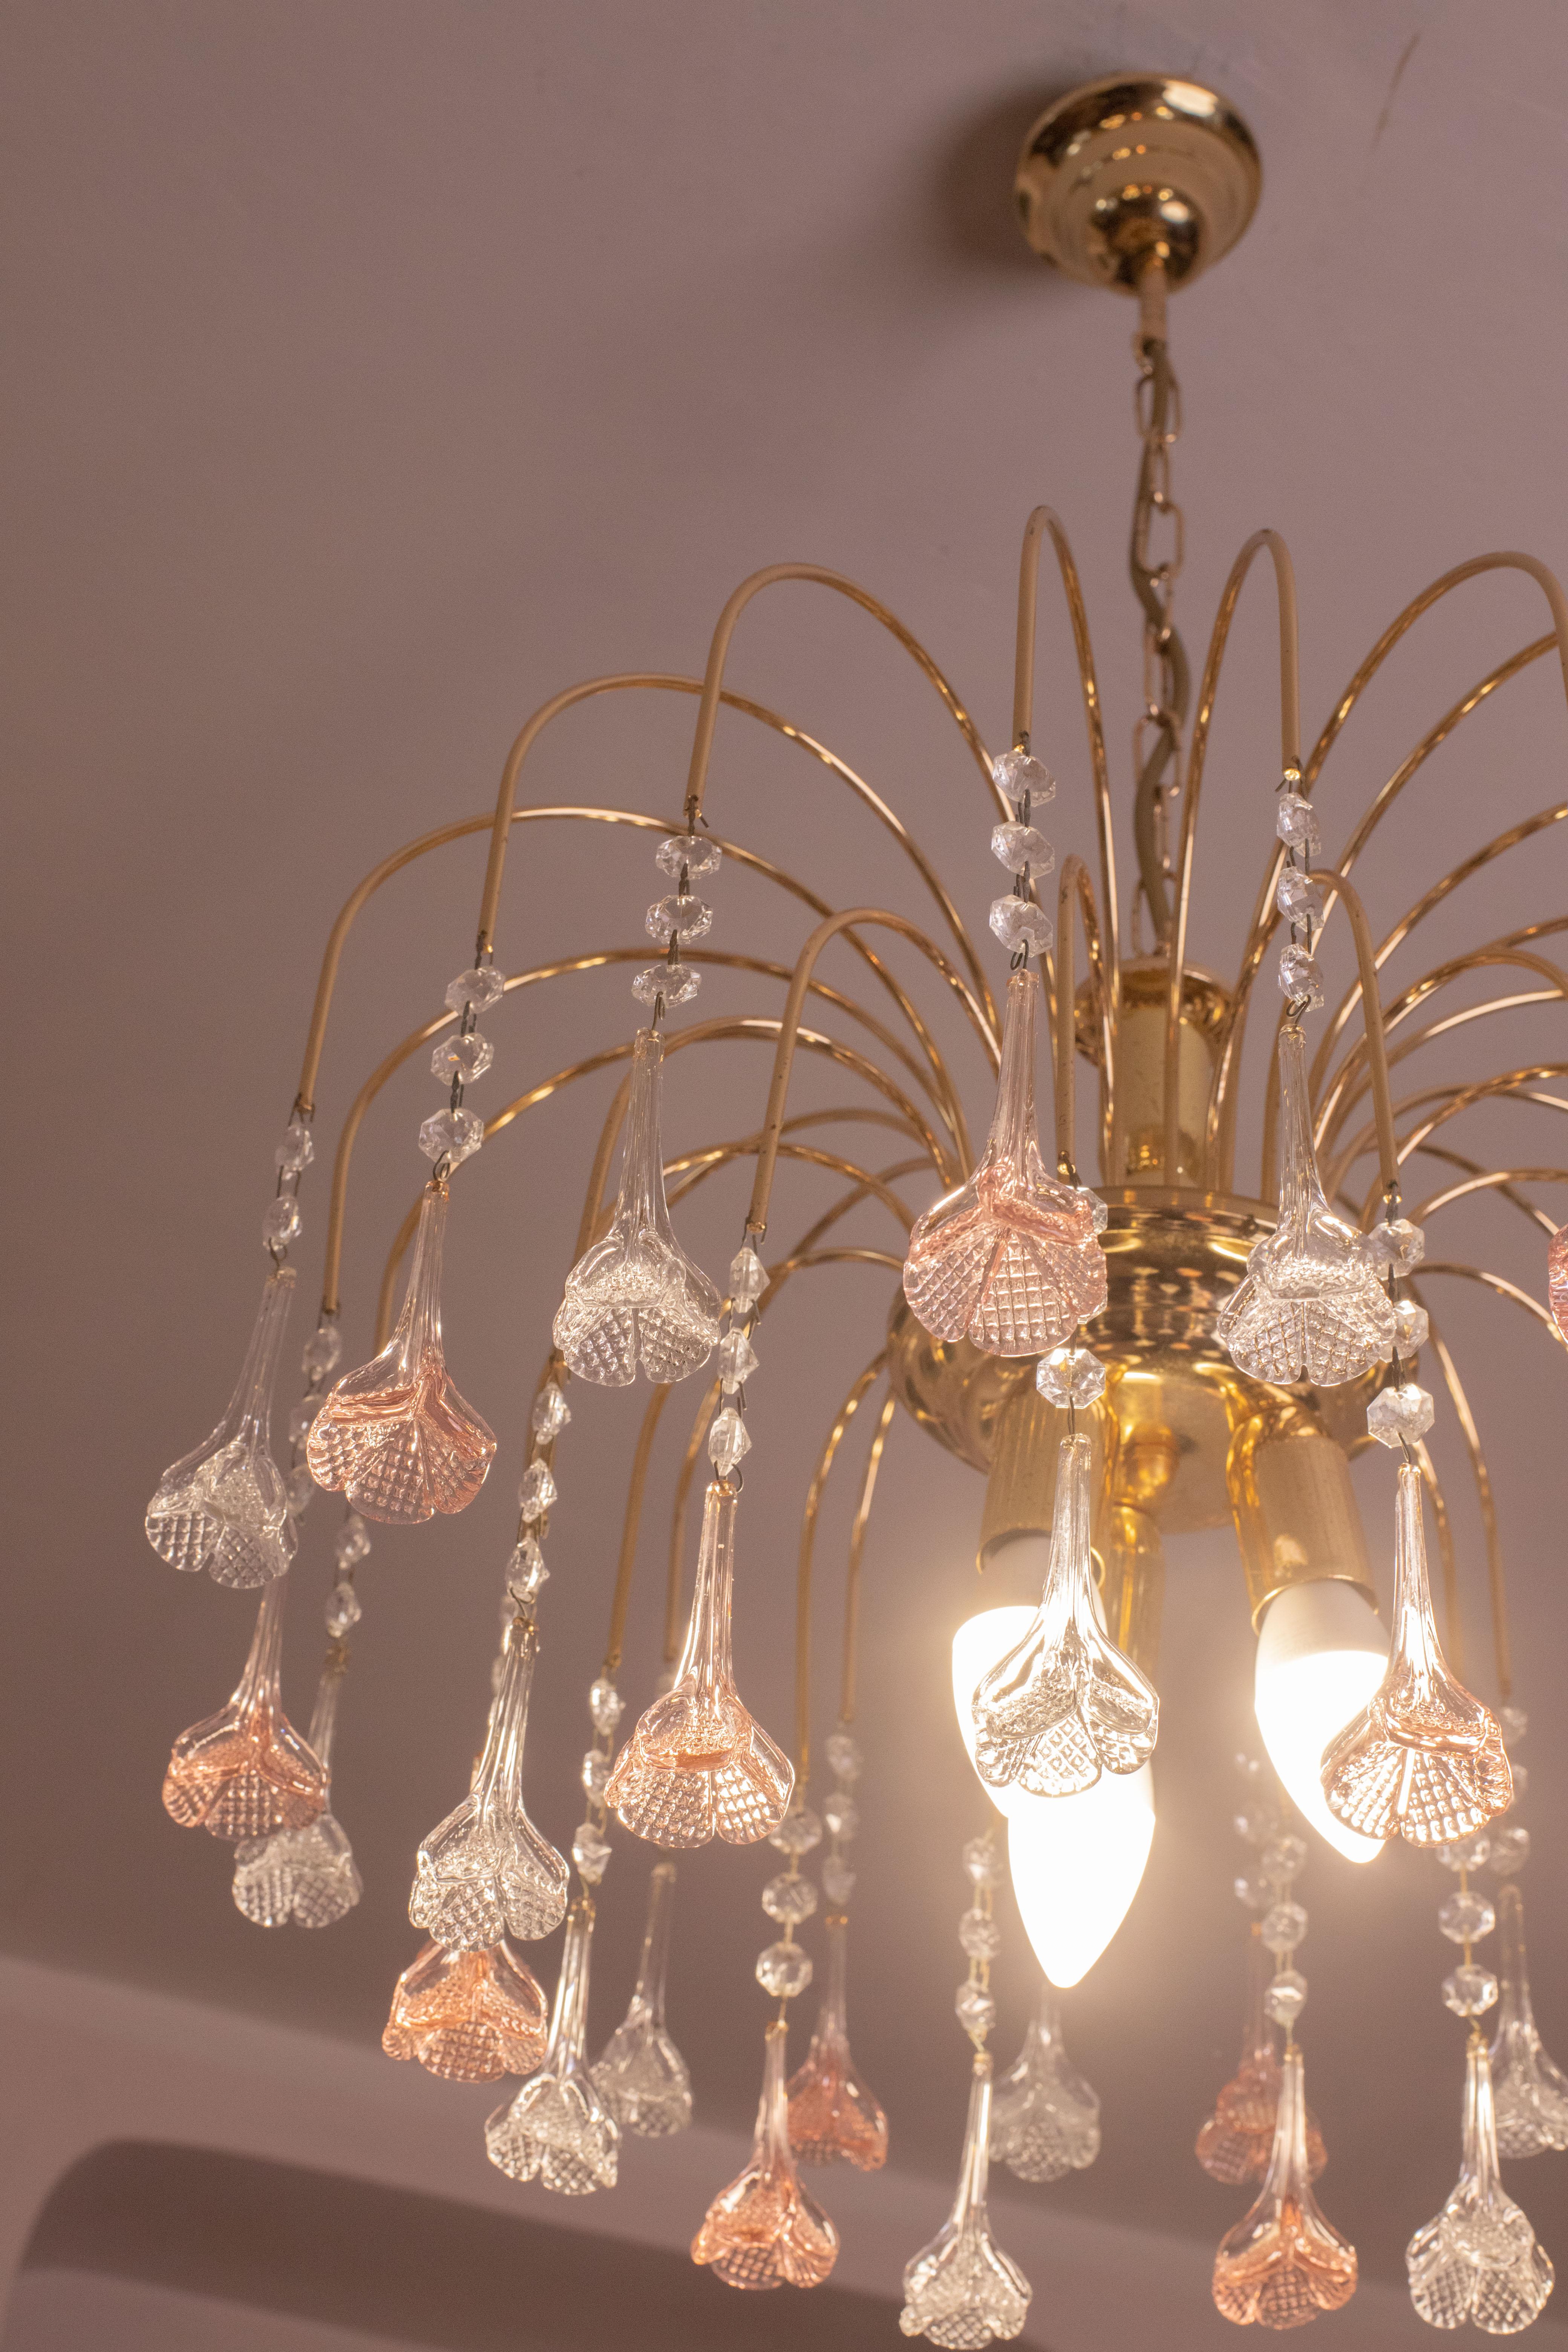 Brigitte Bardot, Pink and Trasparent Murano Flowers Chandelier, 1970s For Sale 8